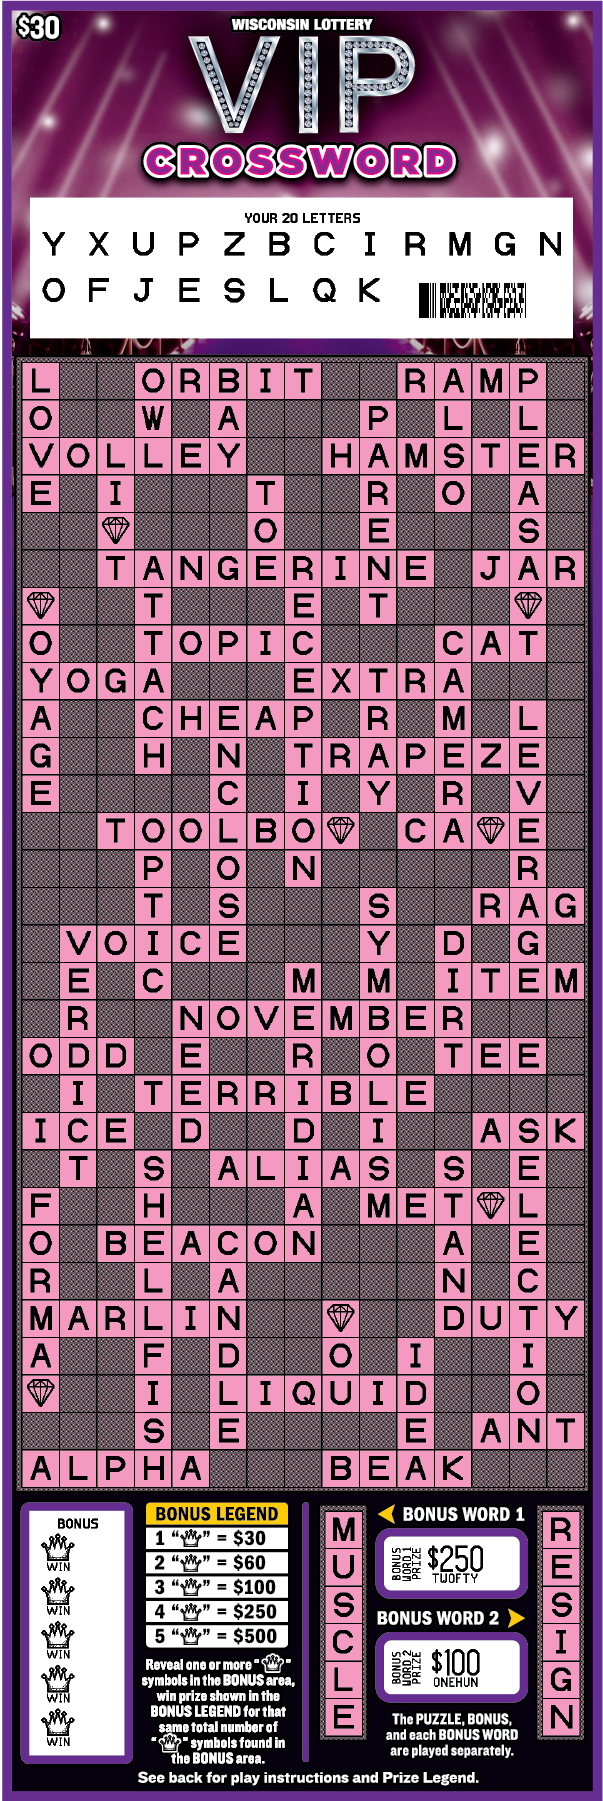 Wisconsin Scratch Game, VIP Crossword purple background with pink text outlined in white, Crossword puzzle Revealed.